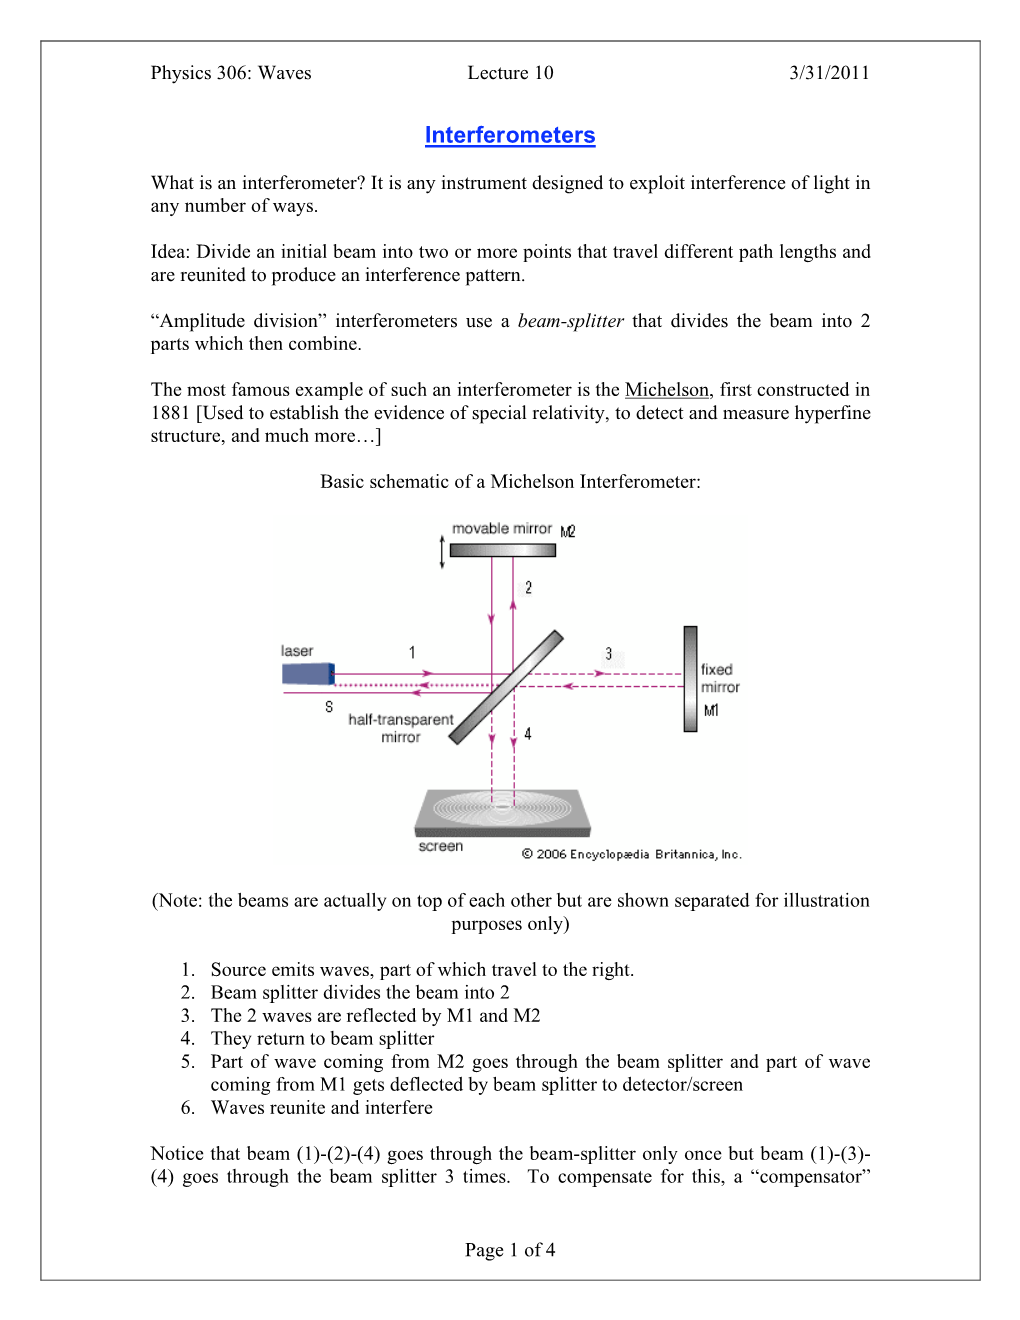 Physics 306: Waves Lecture 10 3/31/2011 Page 1 of 4